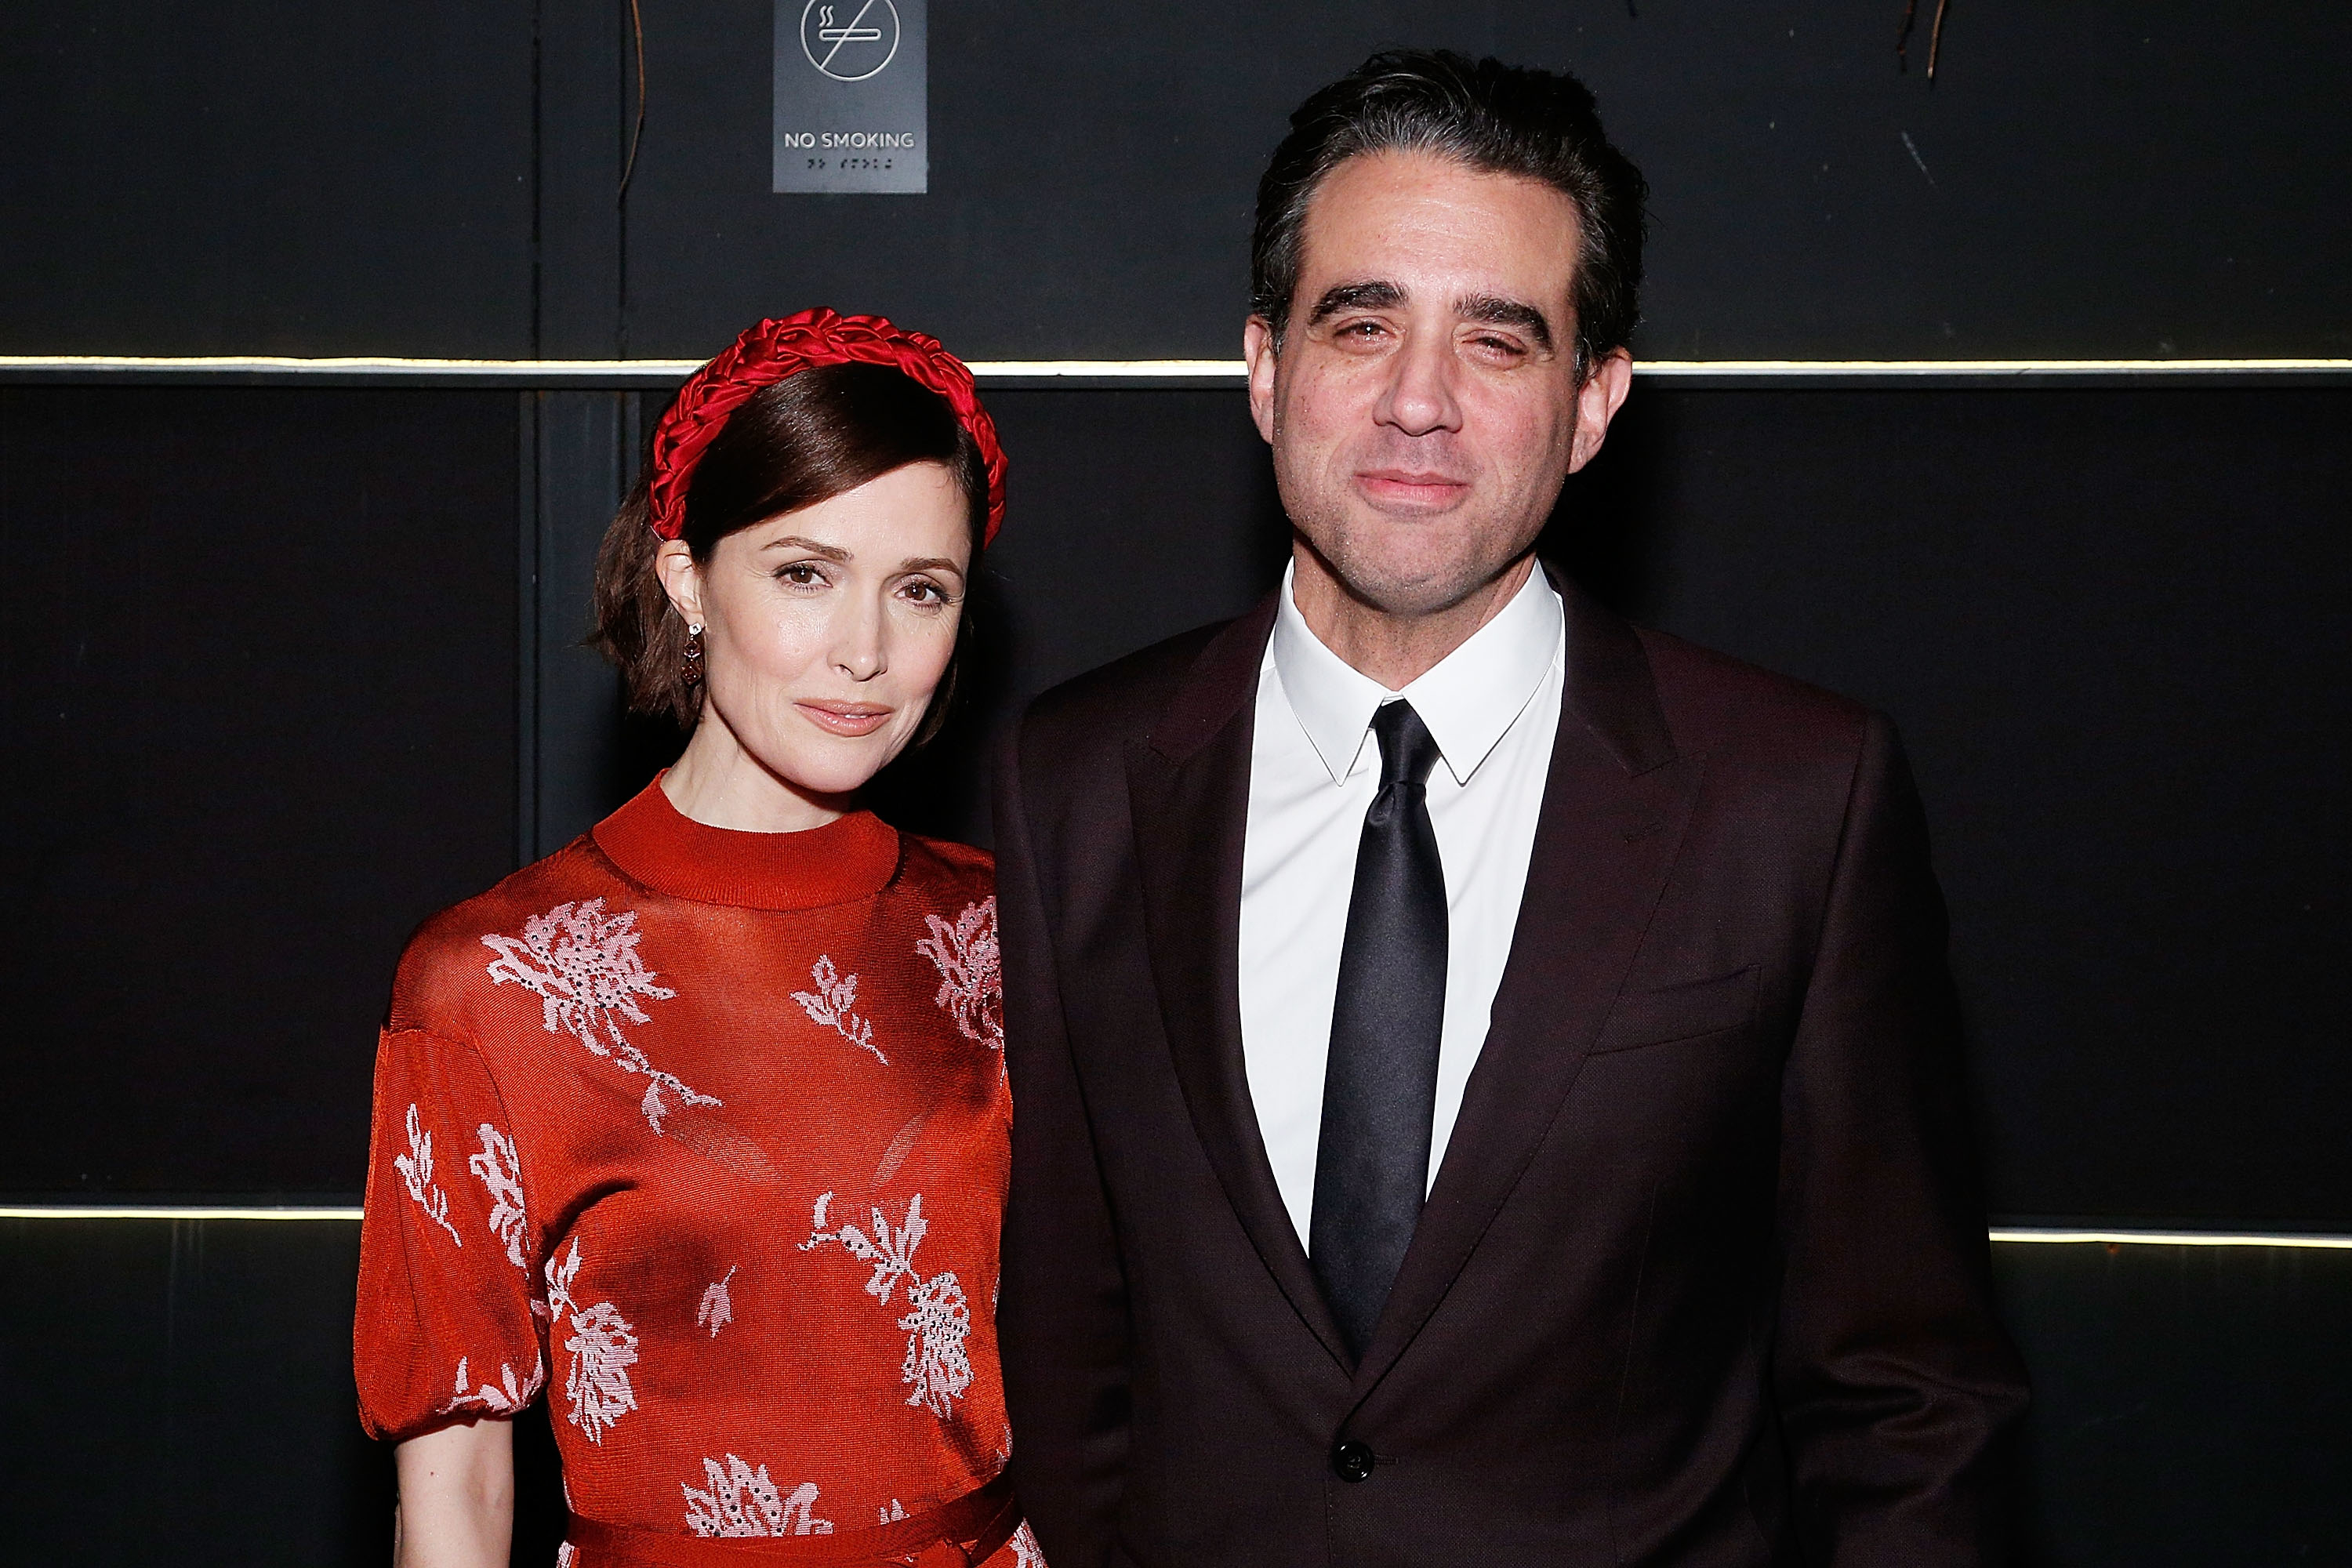 Rose Byrne and Bobby Cannavale attend the BAM opening night after party